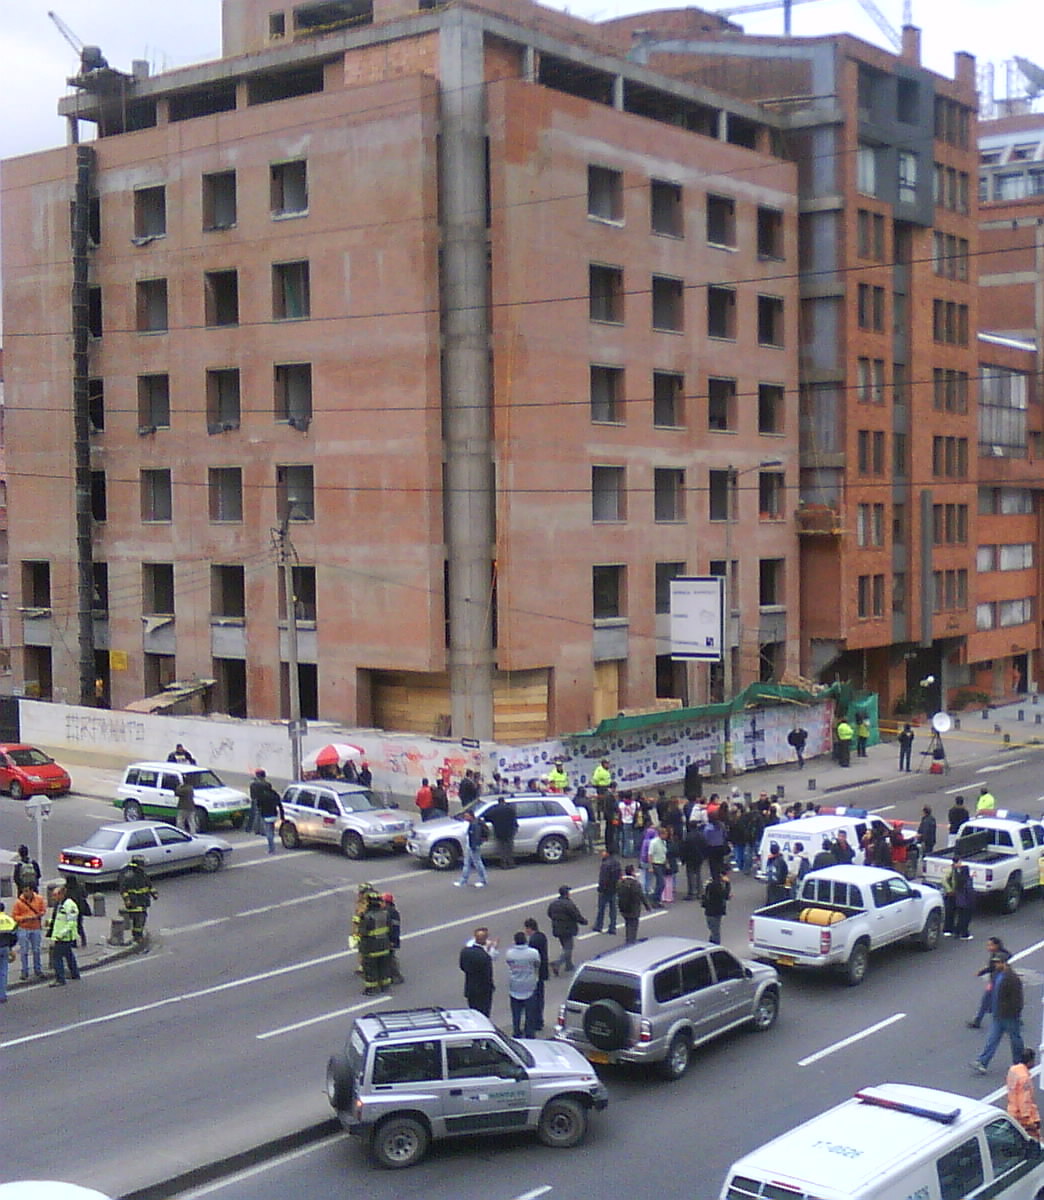 A FARC car bomb attack at the Caracol Radio headquarters in 2010.